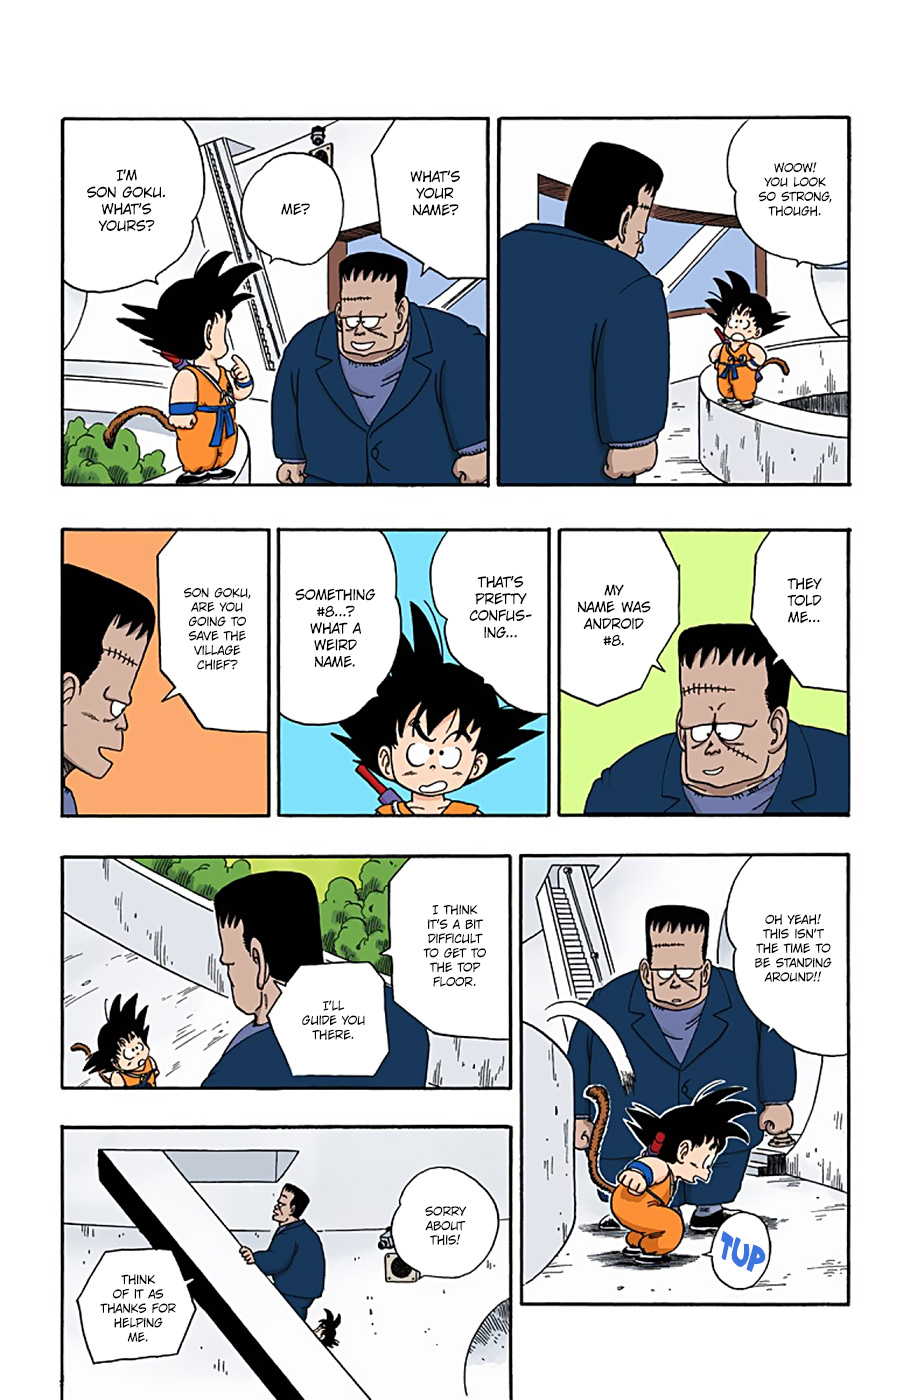 Dragon Ball Full Color Edition Vol. 5 Ch. 63 Android #8